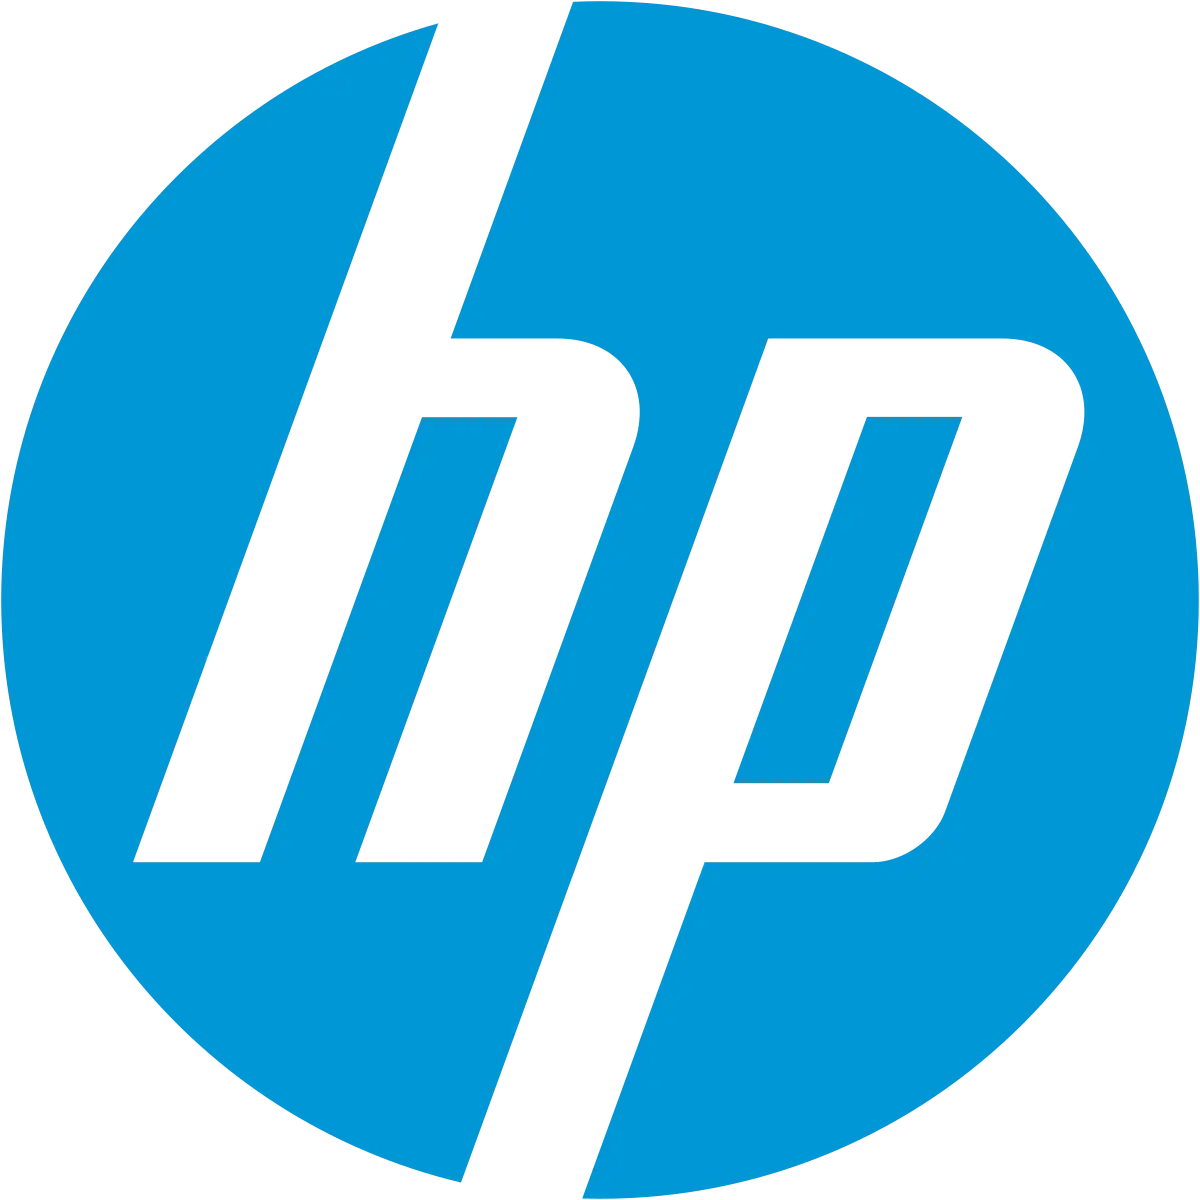 hewlett packard overview - What is HP overview